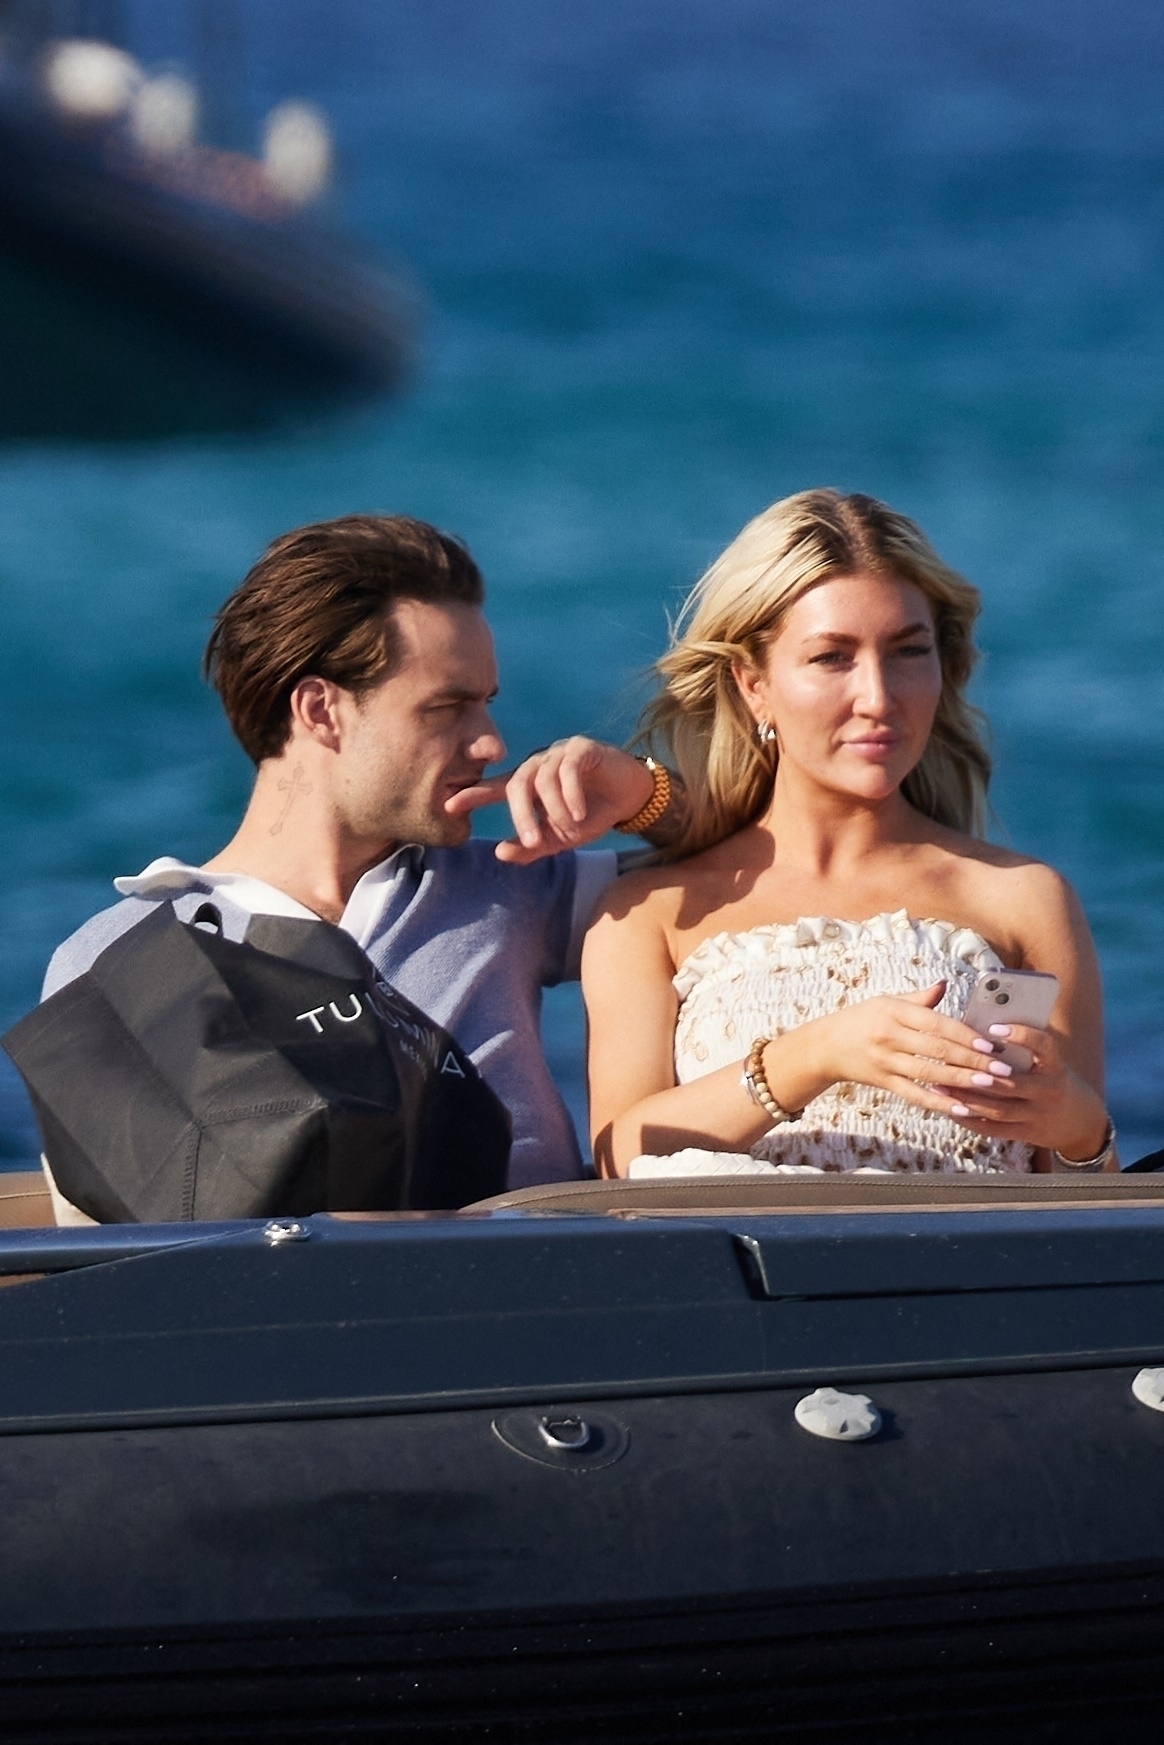 <p>Former One Direction singer Liam Payne and girlfriend Katie Cassidy departed a St-Tropez beach on a dinghy while vacationing in France on July 23.</p><p>MORE: <a href="https://www.msn.com/en-us/community/channel/vid-kwt2e0544658wubk9hsb0rpvnfkttmu3tuj7uq3i4wuywgbakeva?item=flights%3Aprg-tipsubsc-v1a&ocid=social-peregrine&cvid=333aa5de5a654aa7a98a6930005e8f60&ei=2" rel="noreferrer noopener">Follow Wonderwall on MSN for more fun celebrity & entertainment photo galleries and content</a></p>